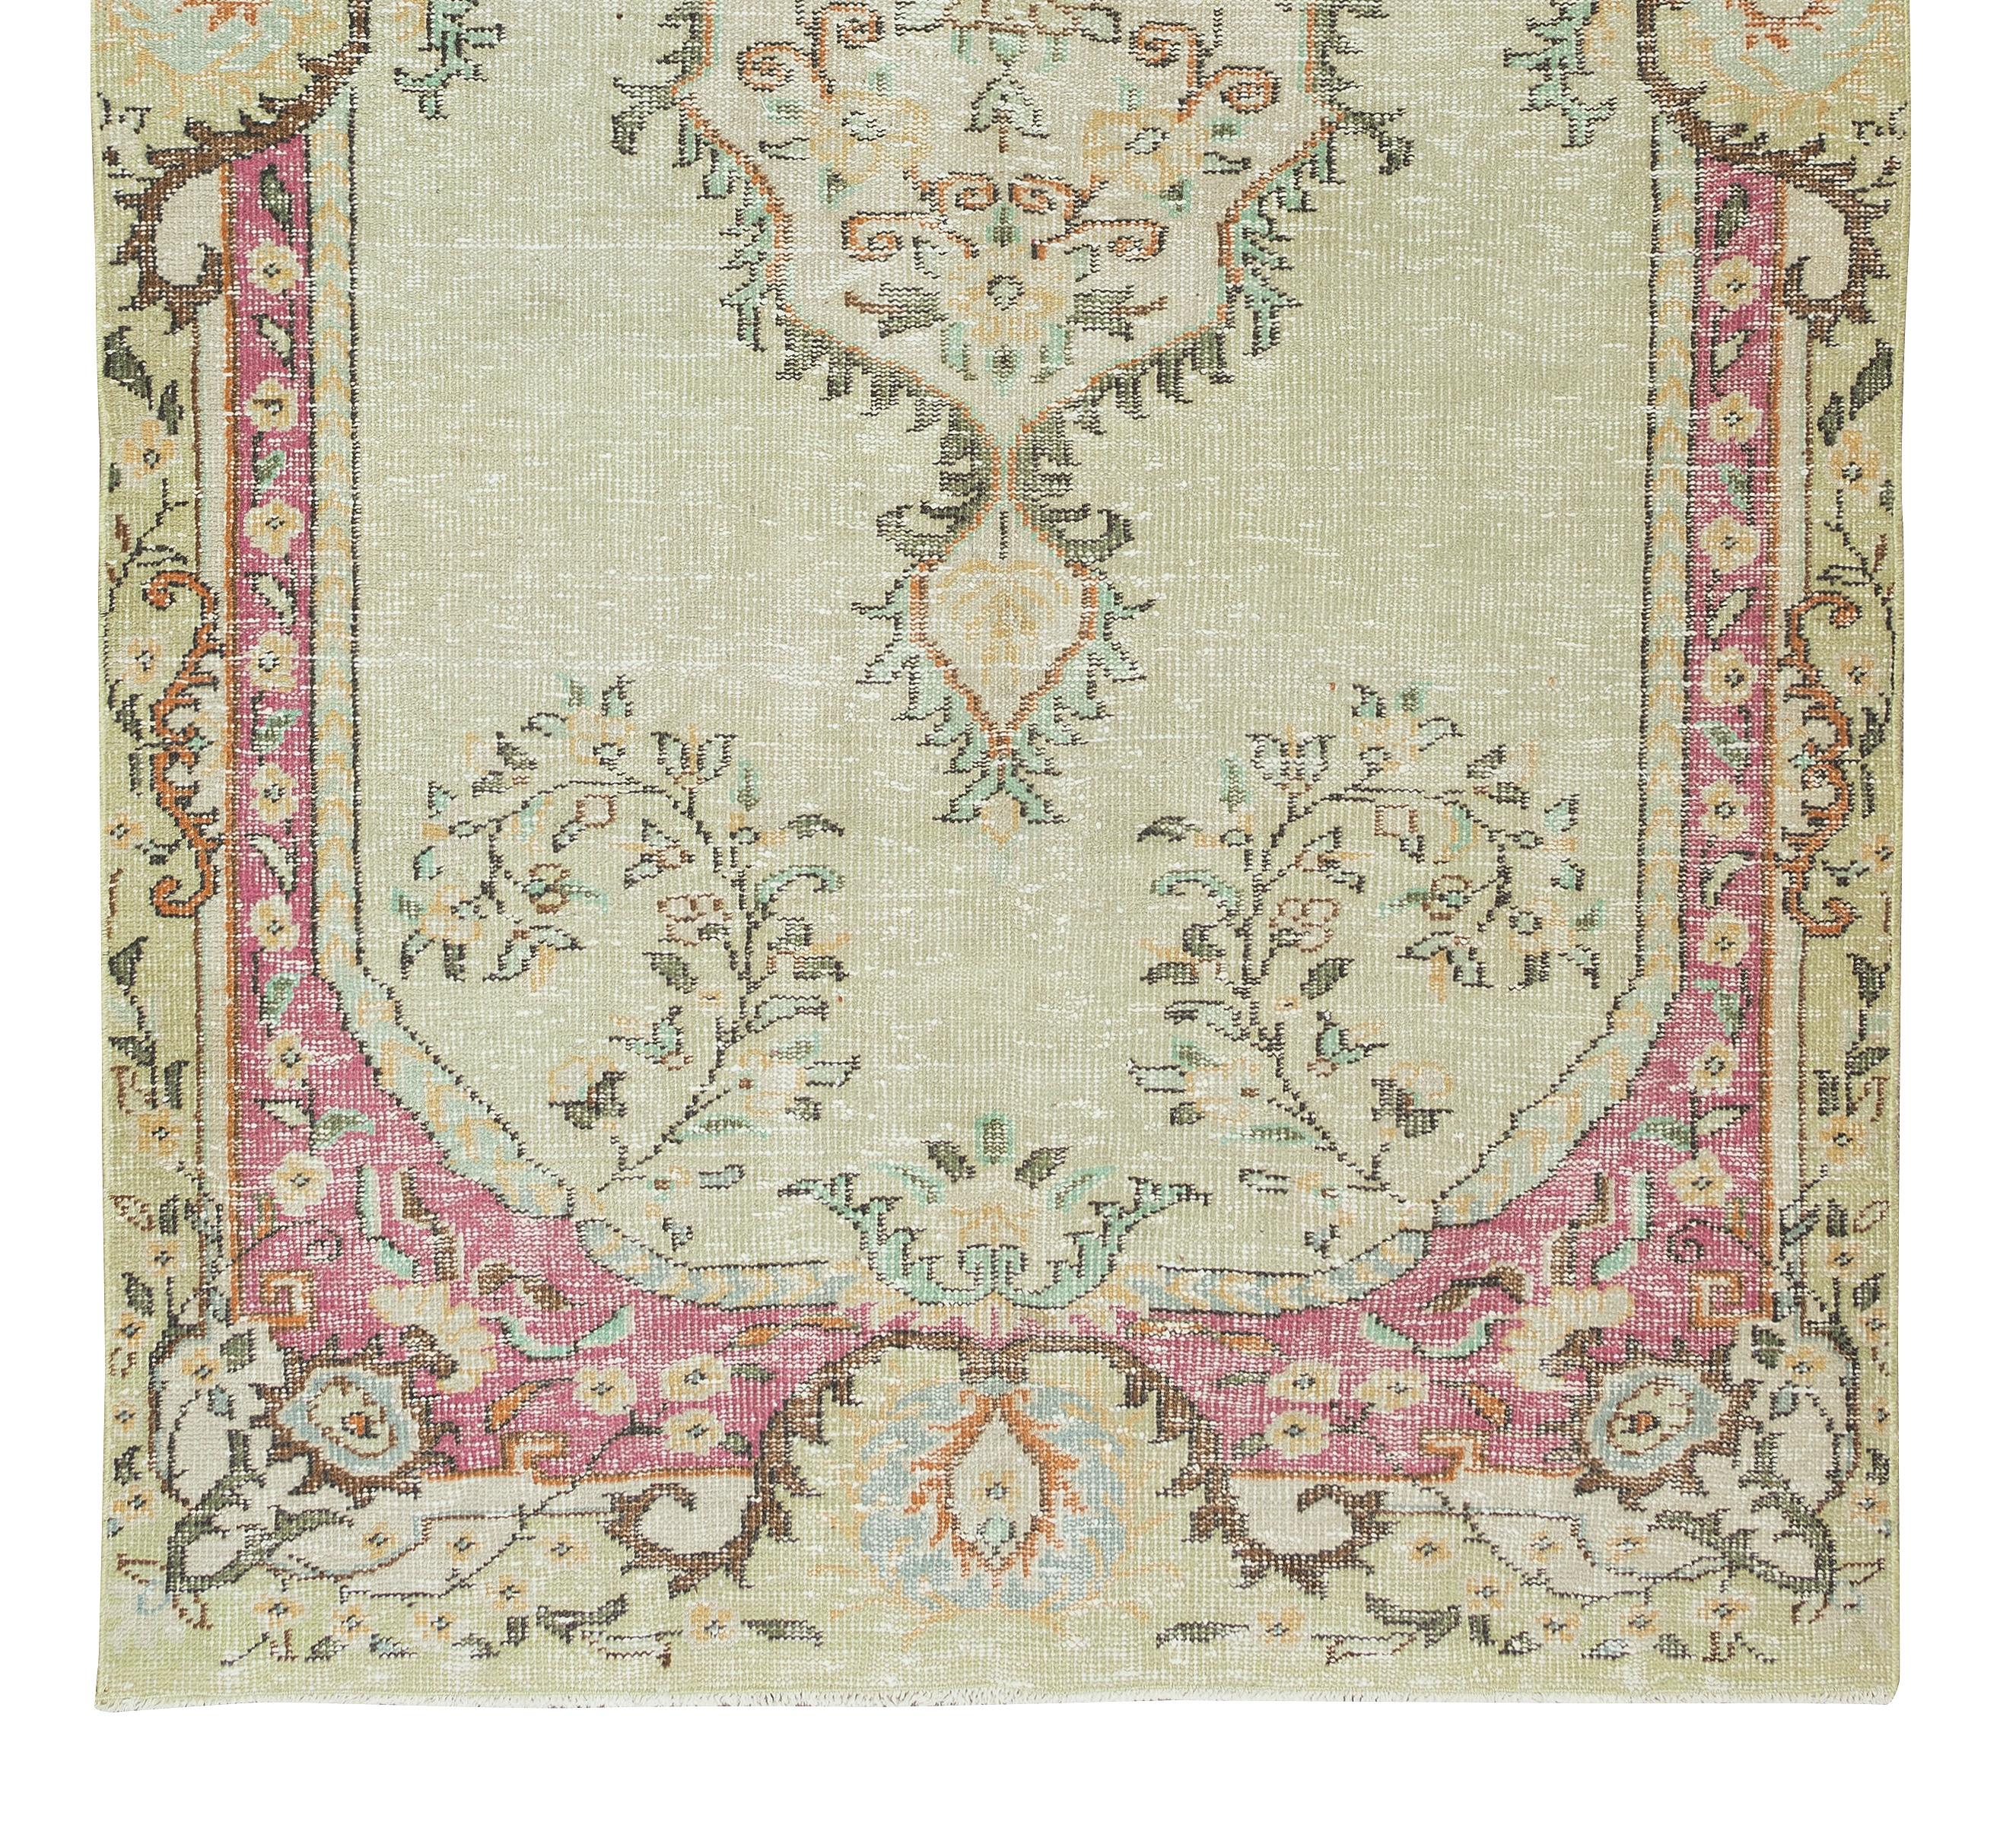 5.2x9.7 Ft Turkish Vintage Wool Area Rug, Light Green & Pink Handmade Carpet In Good Condition For Sale In Philadelphia, PA